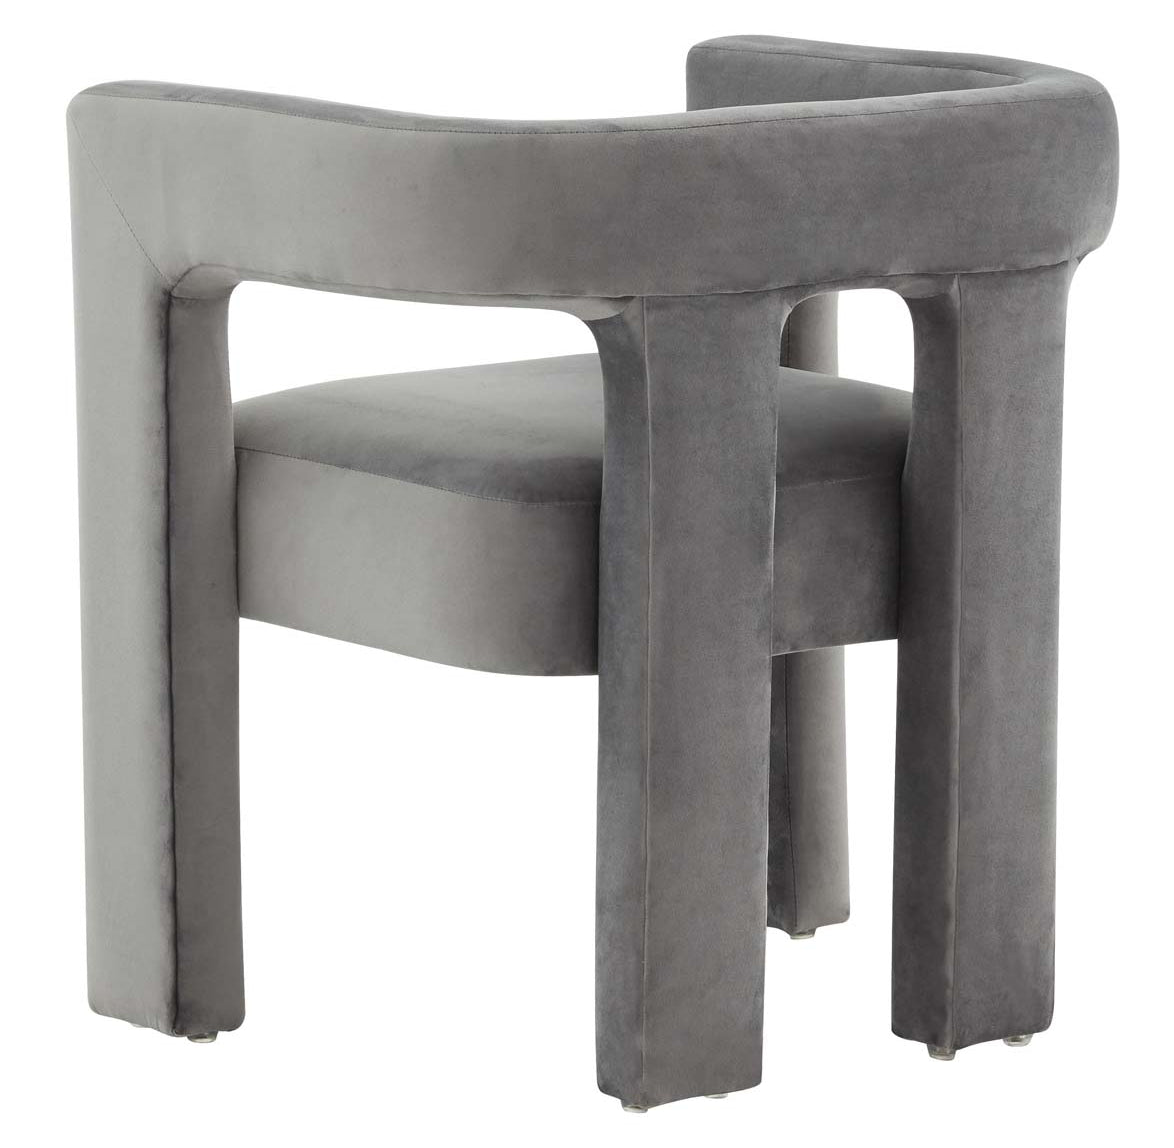 Safavieh Couture Deandre Contemporary Dining Chair - Slate Grey